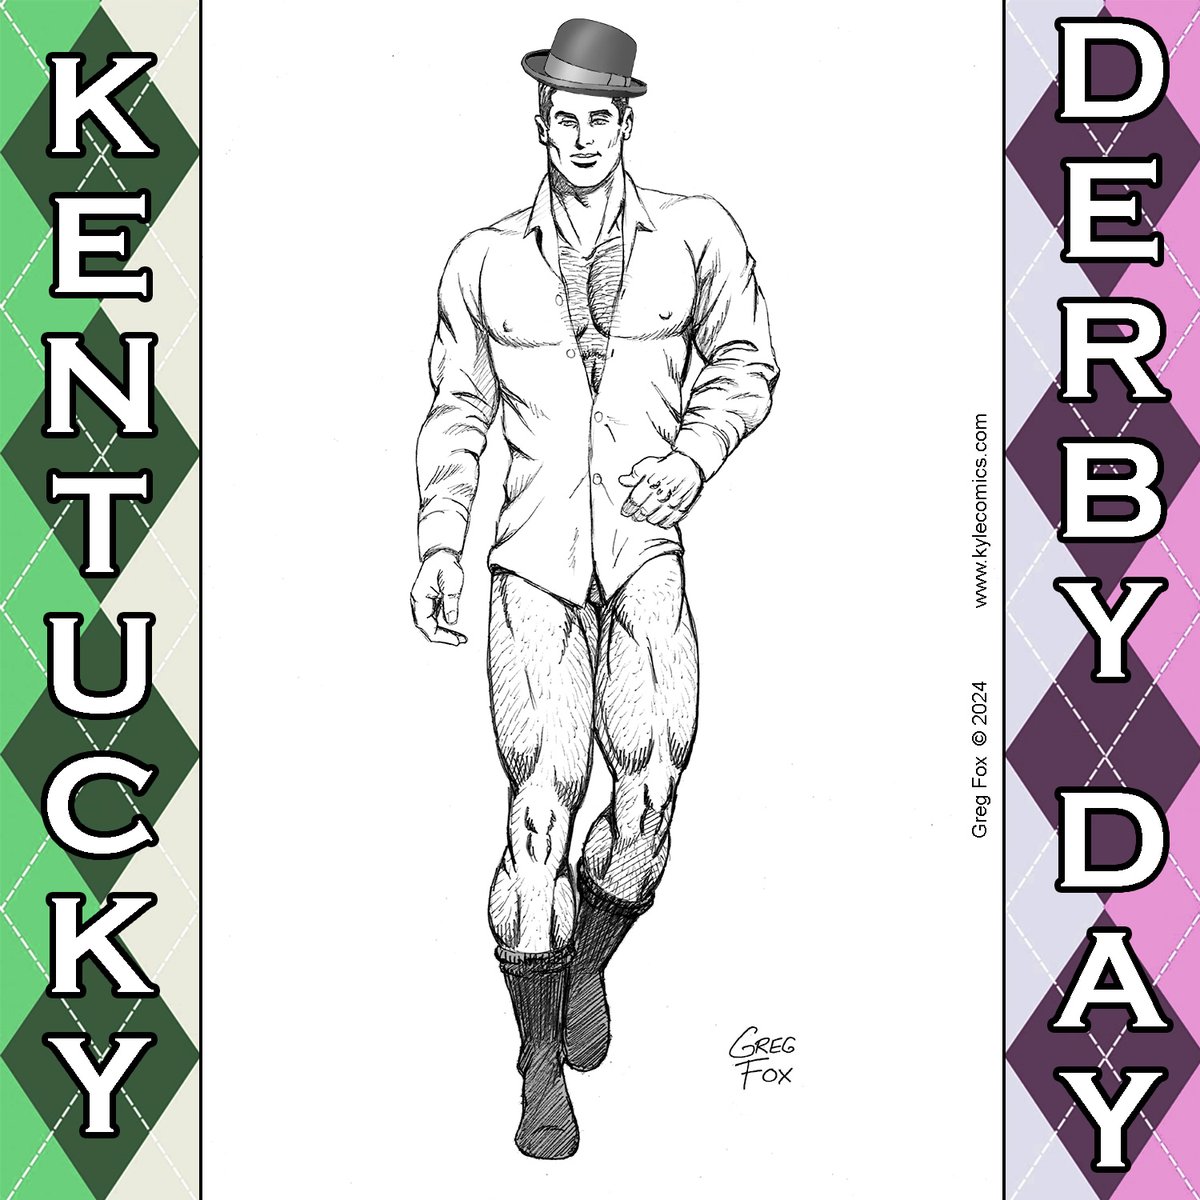 Lest we forget, amongst all the events of today, (World Naked Gardening Day, Free Comic Book Day, May the Fourth), that it is ALSO Kentucky Derby Day... here comes Kyle's B&B's own Kentucky boy Price Kingsbury wearing his derby, (and not much else!), to remind you it is so! 🐴